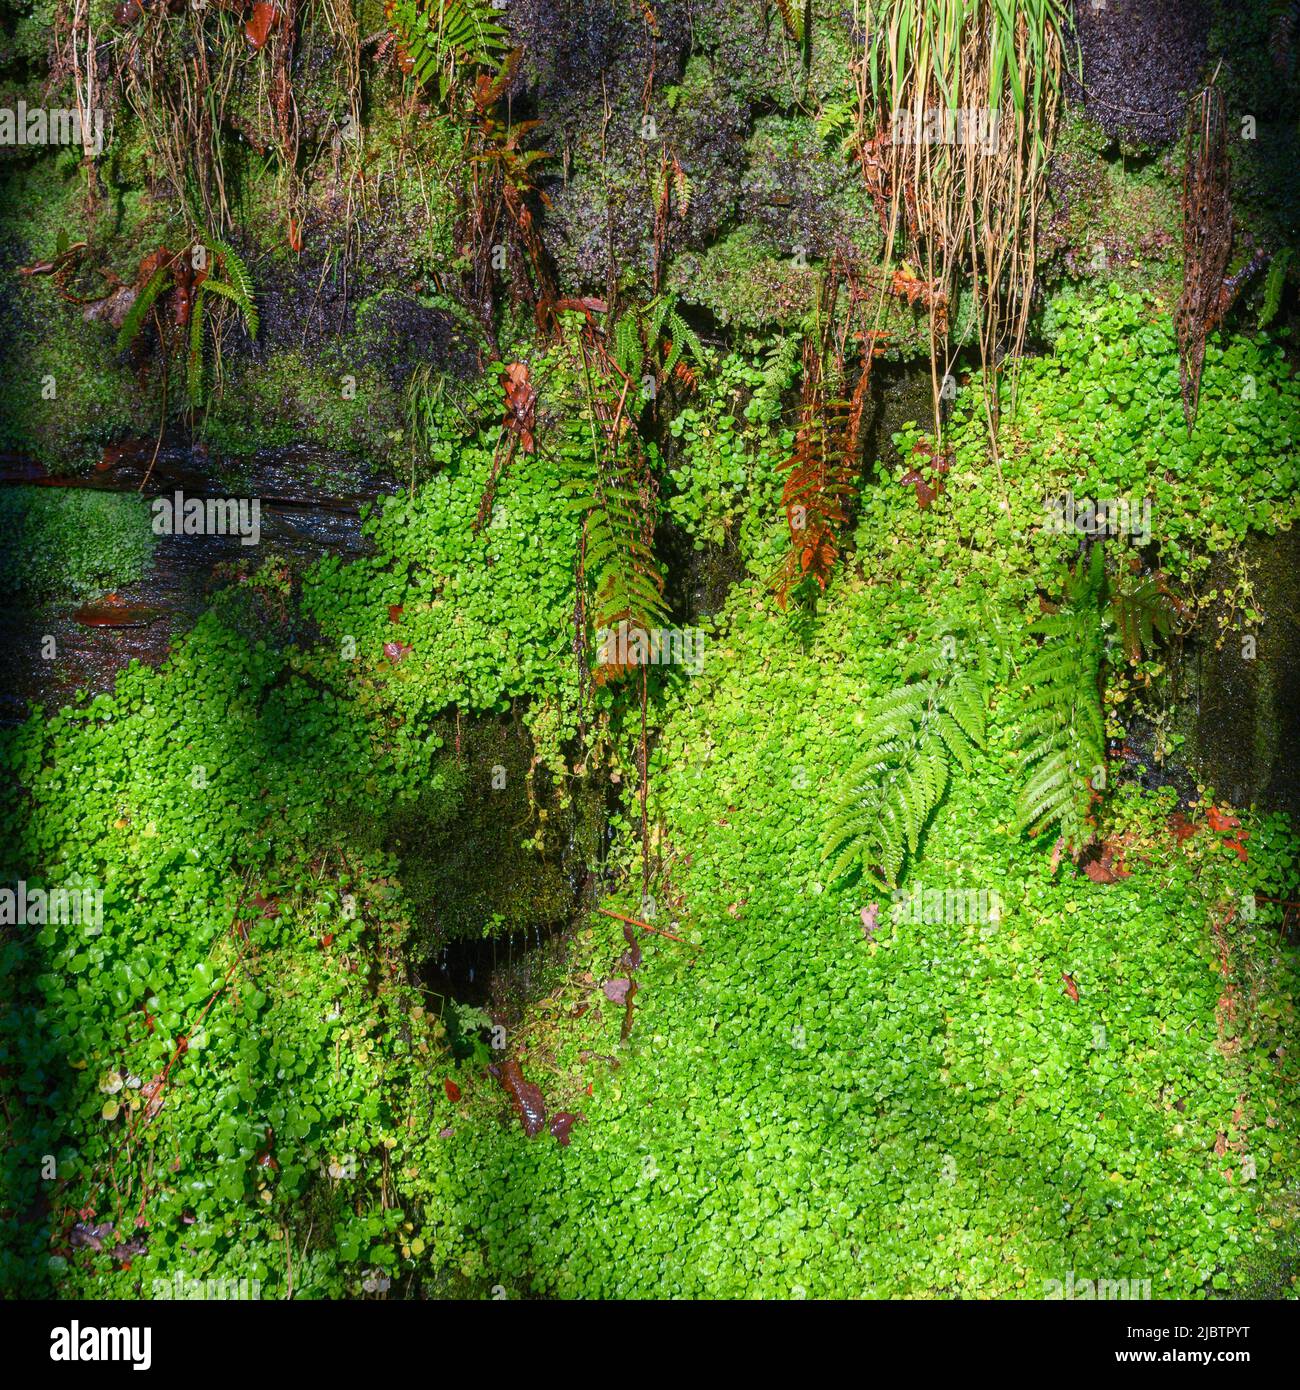 Duckweed and ferns share a humid habitat in the runoff of a slaty cliff in the Courel Mountain Range in Lugo Galicia Stock Photo